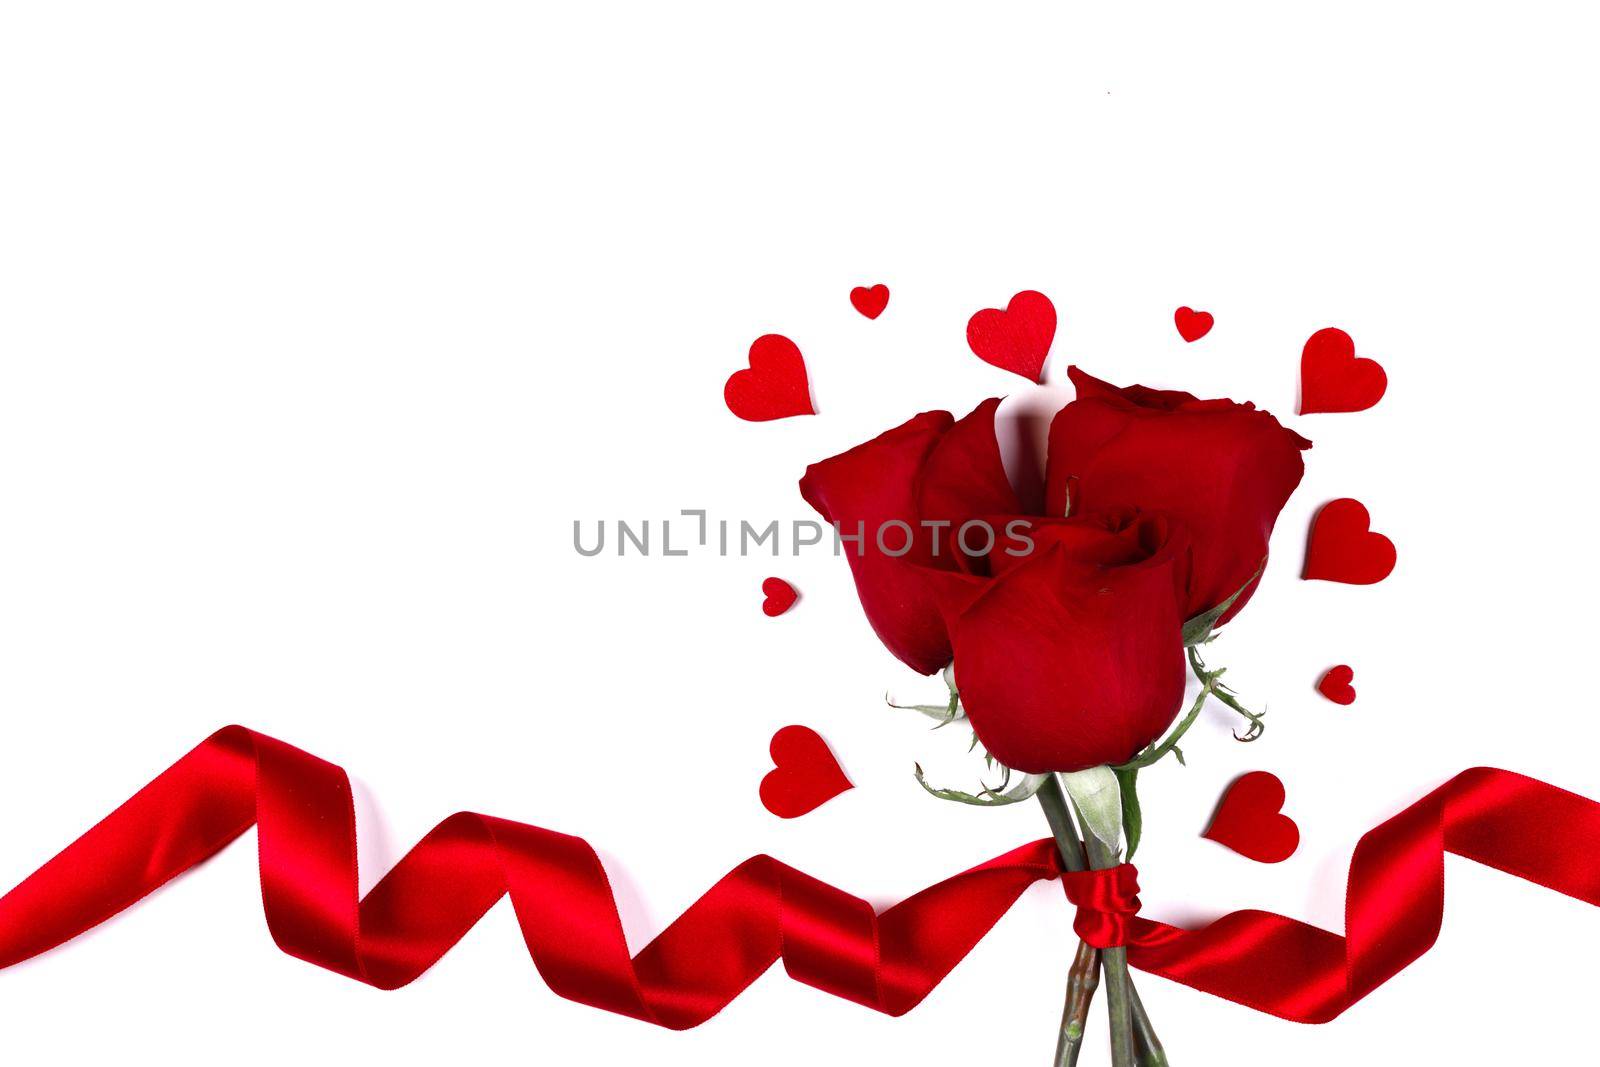 Valentines day hearts and red rose flowers isolated on white background